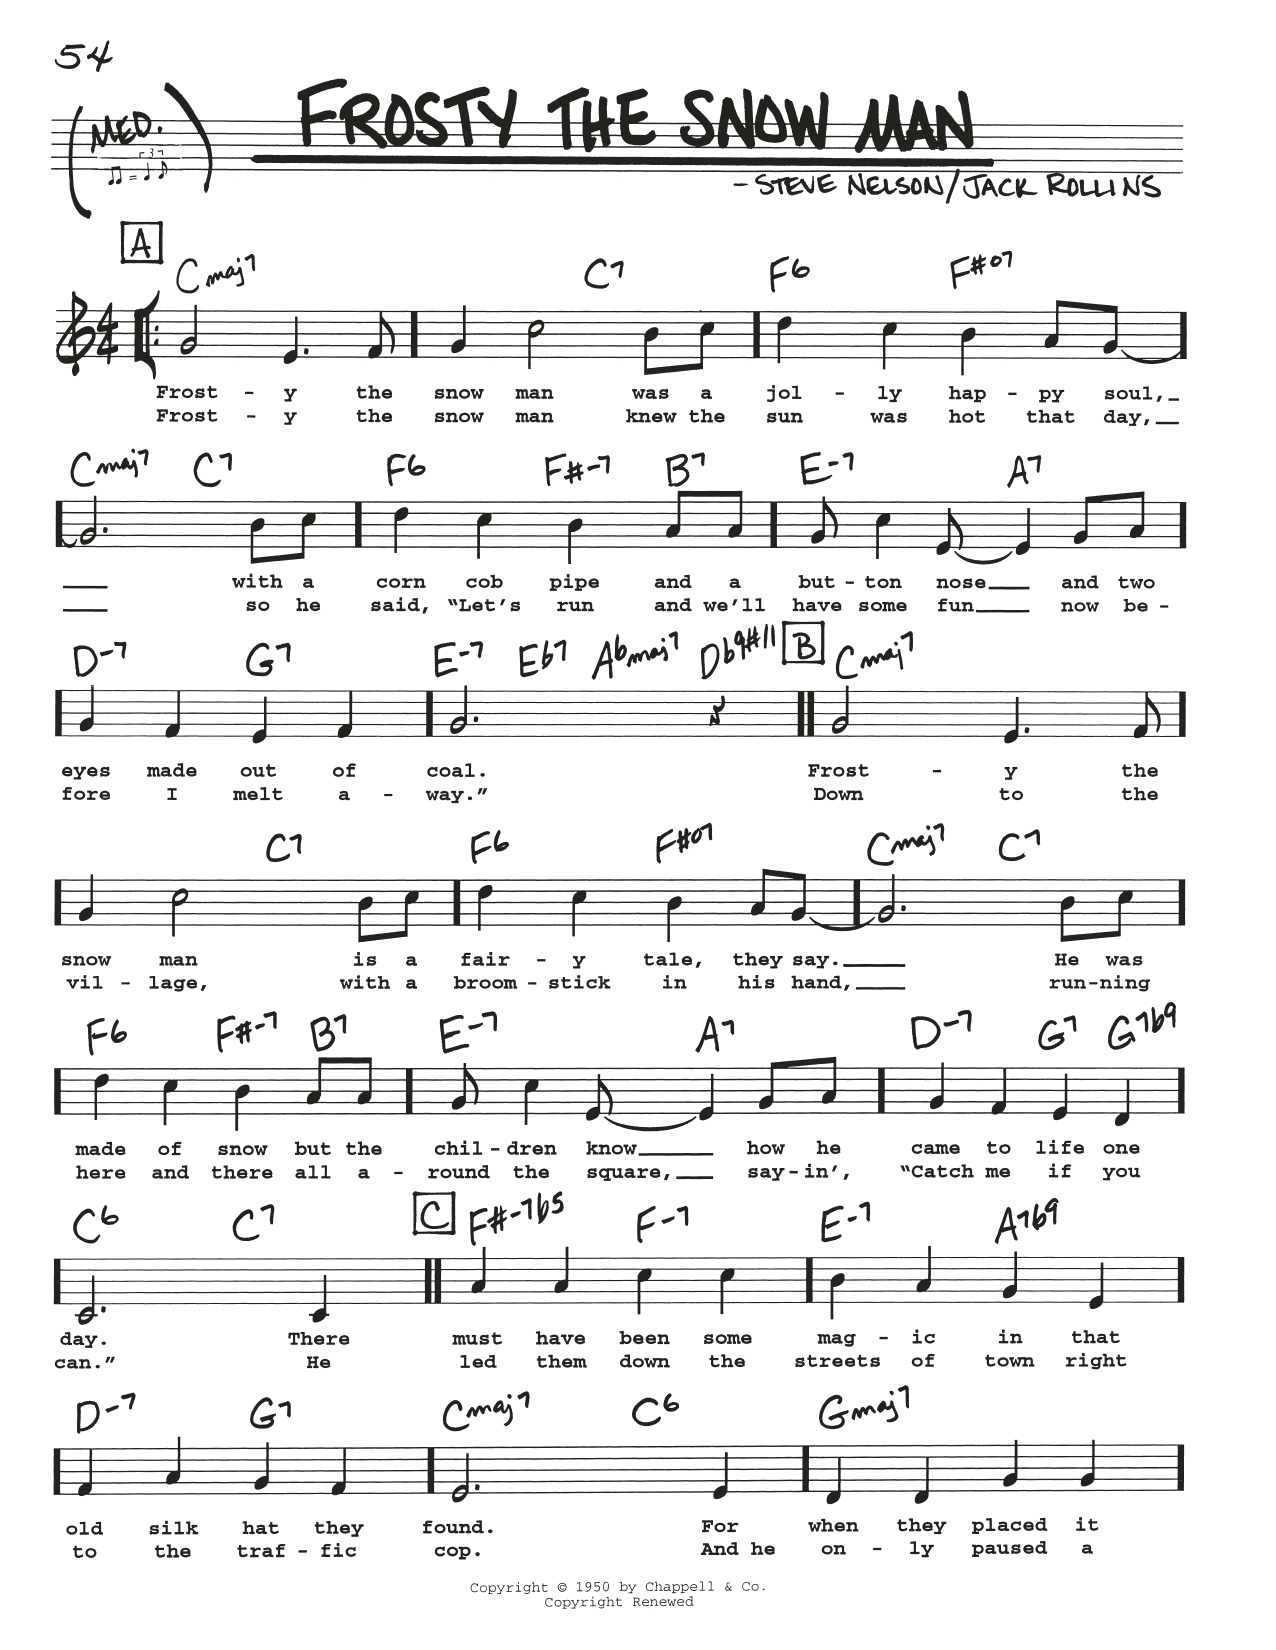 Download Jack Rollins Frosty The Snow Man Sheet Music